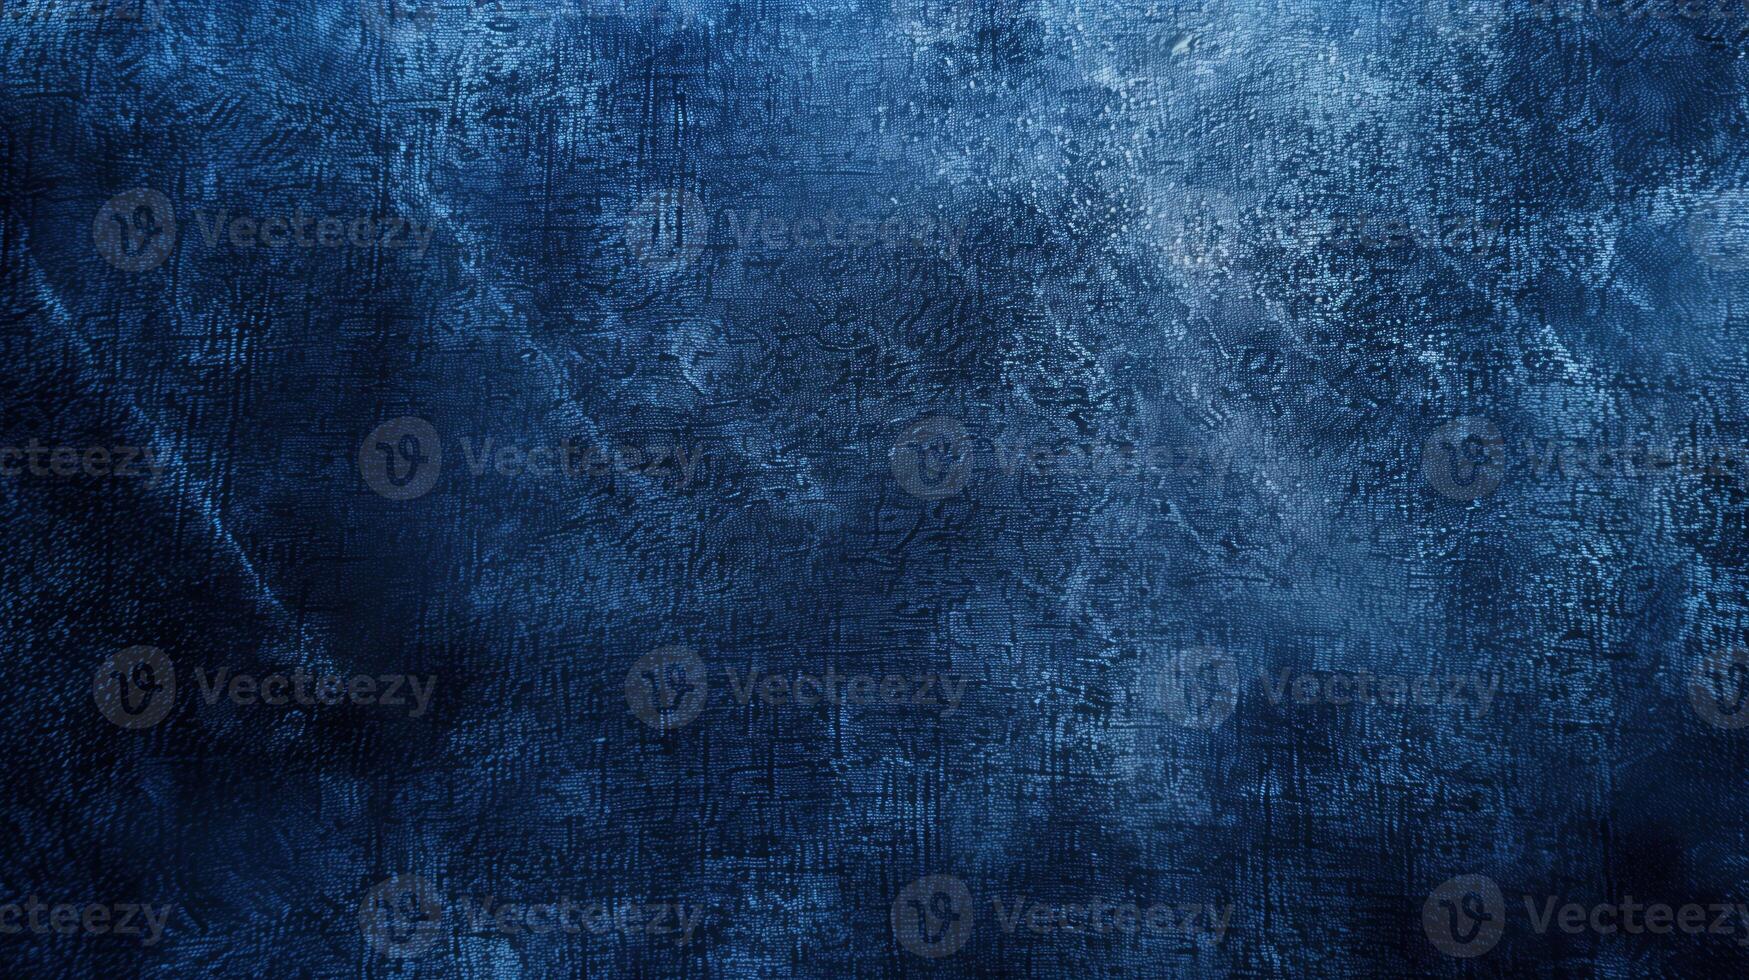 Textured indigo blue background with abstract patterns. photo